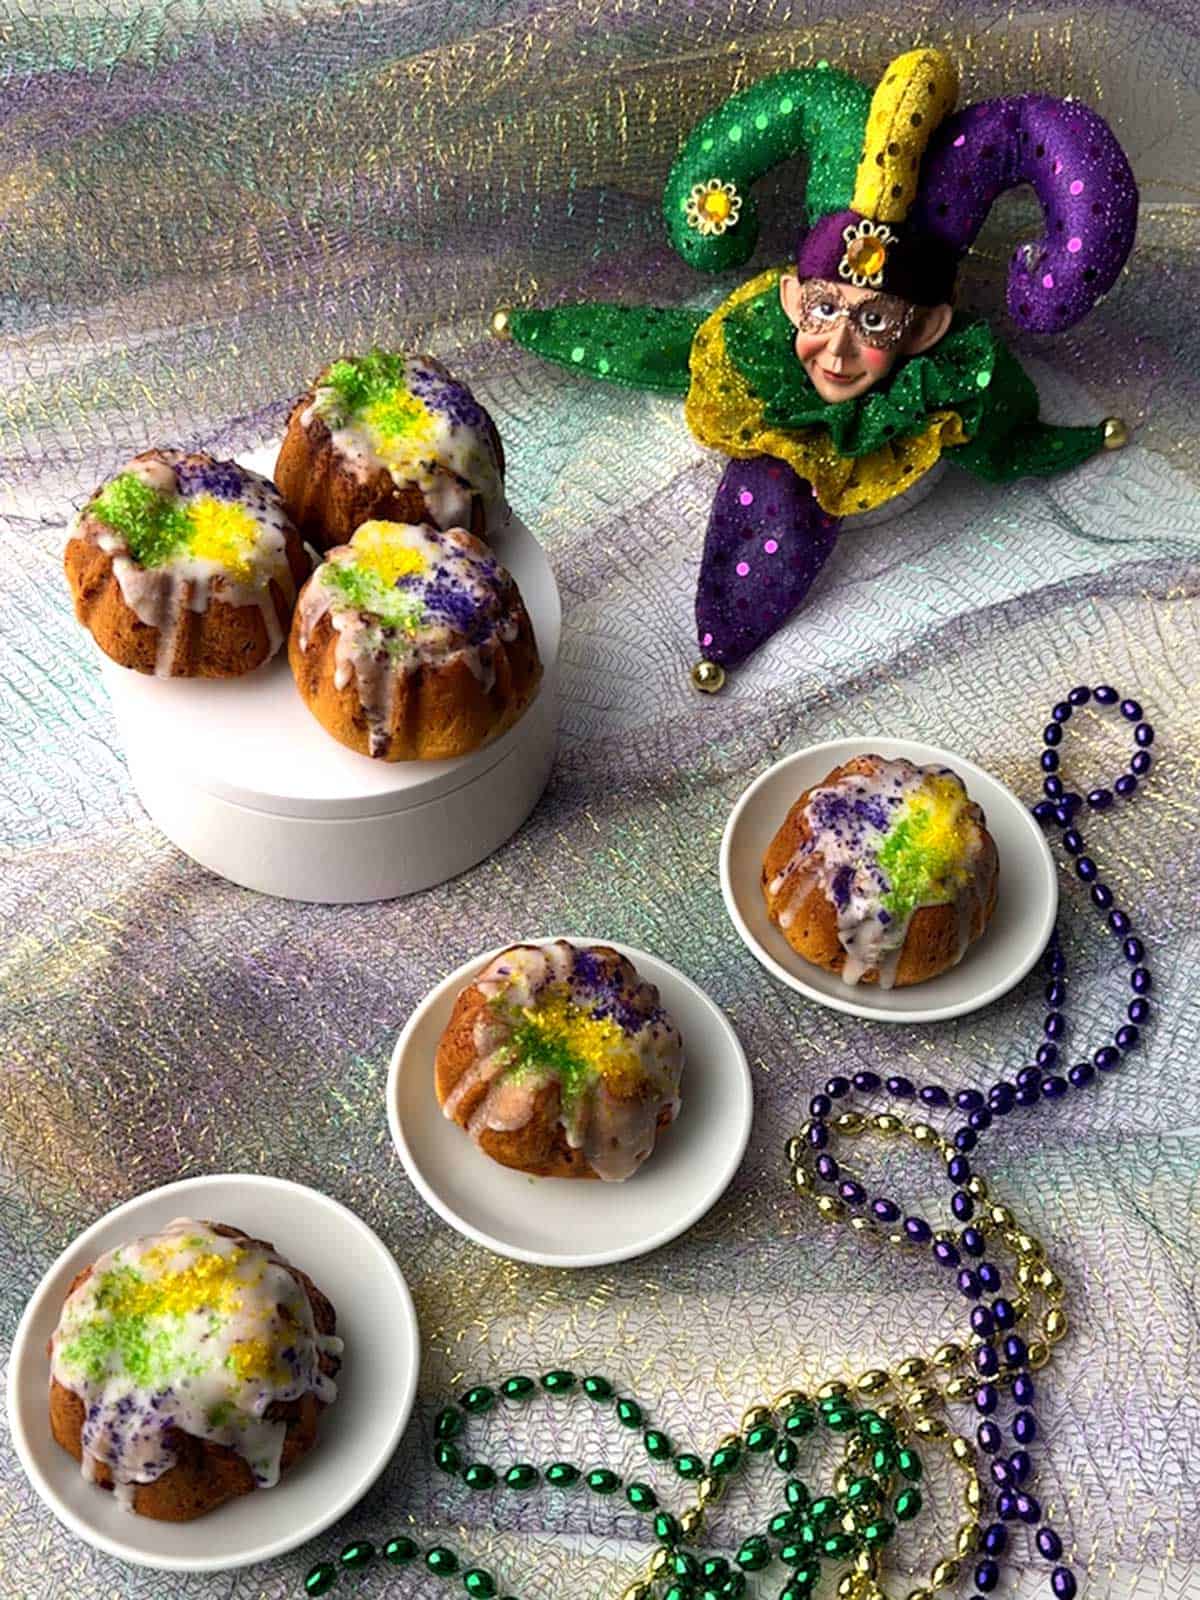 Mini king cakes made with refrigerated store-bought cinnamon rolls.